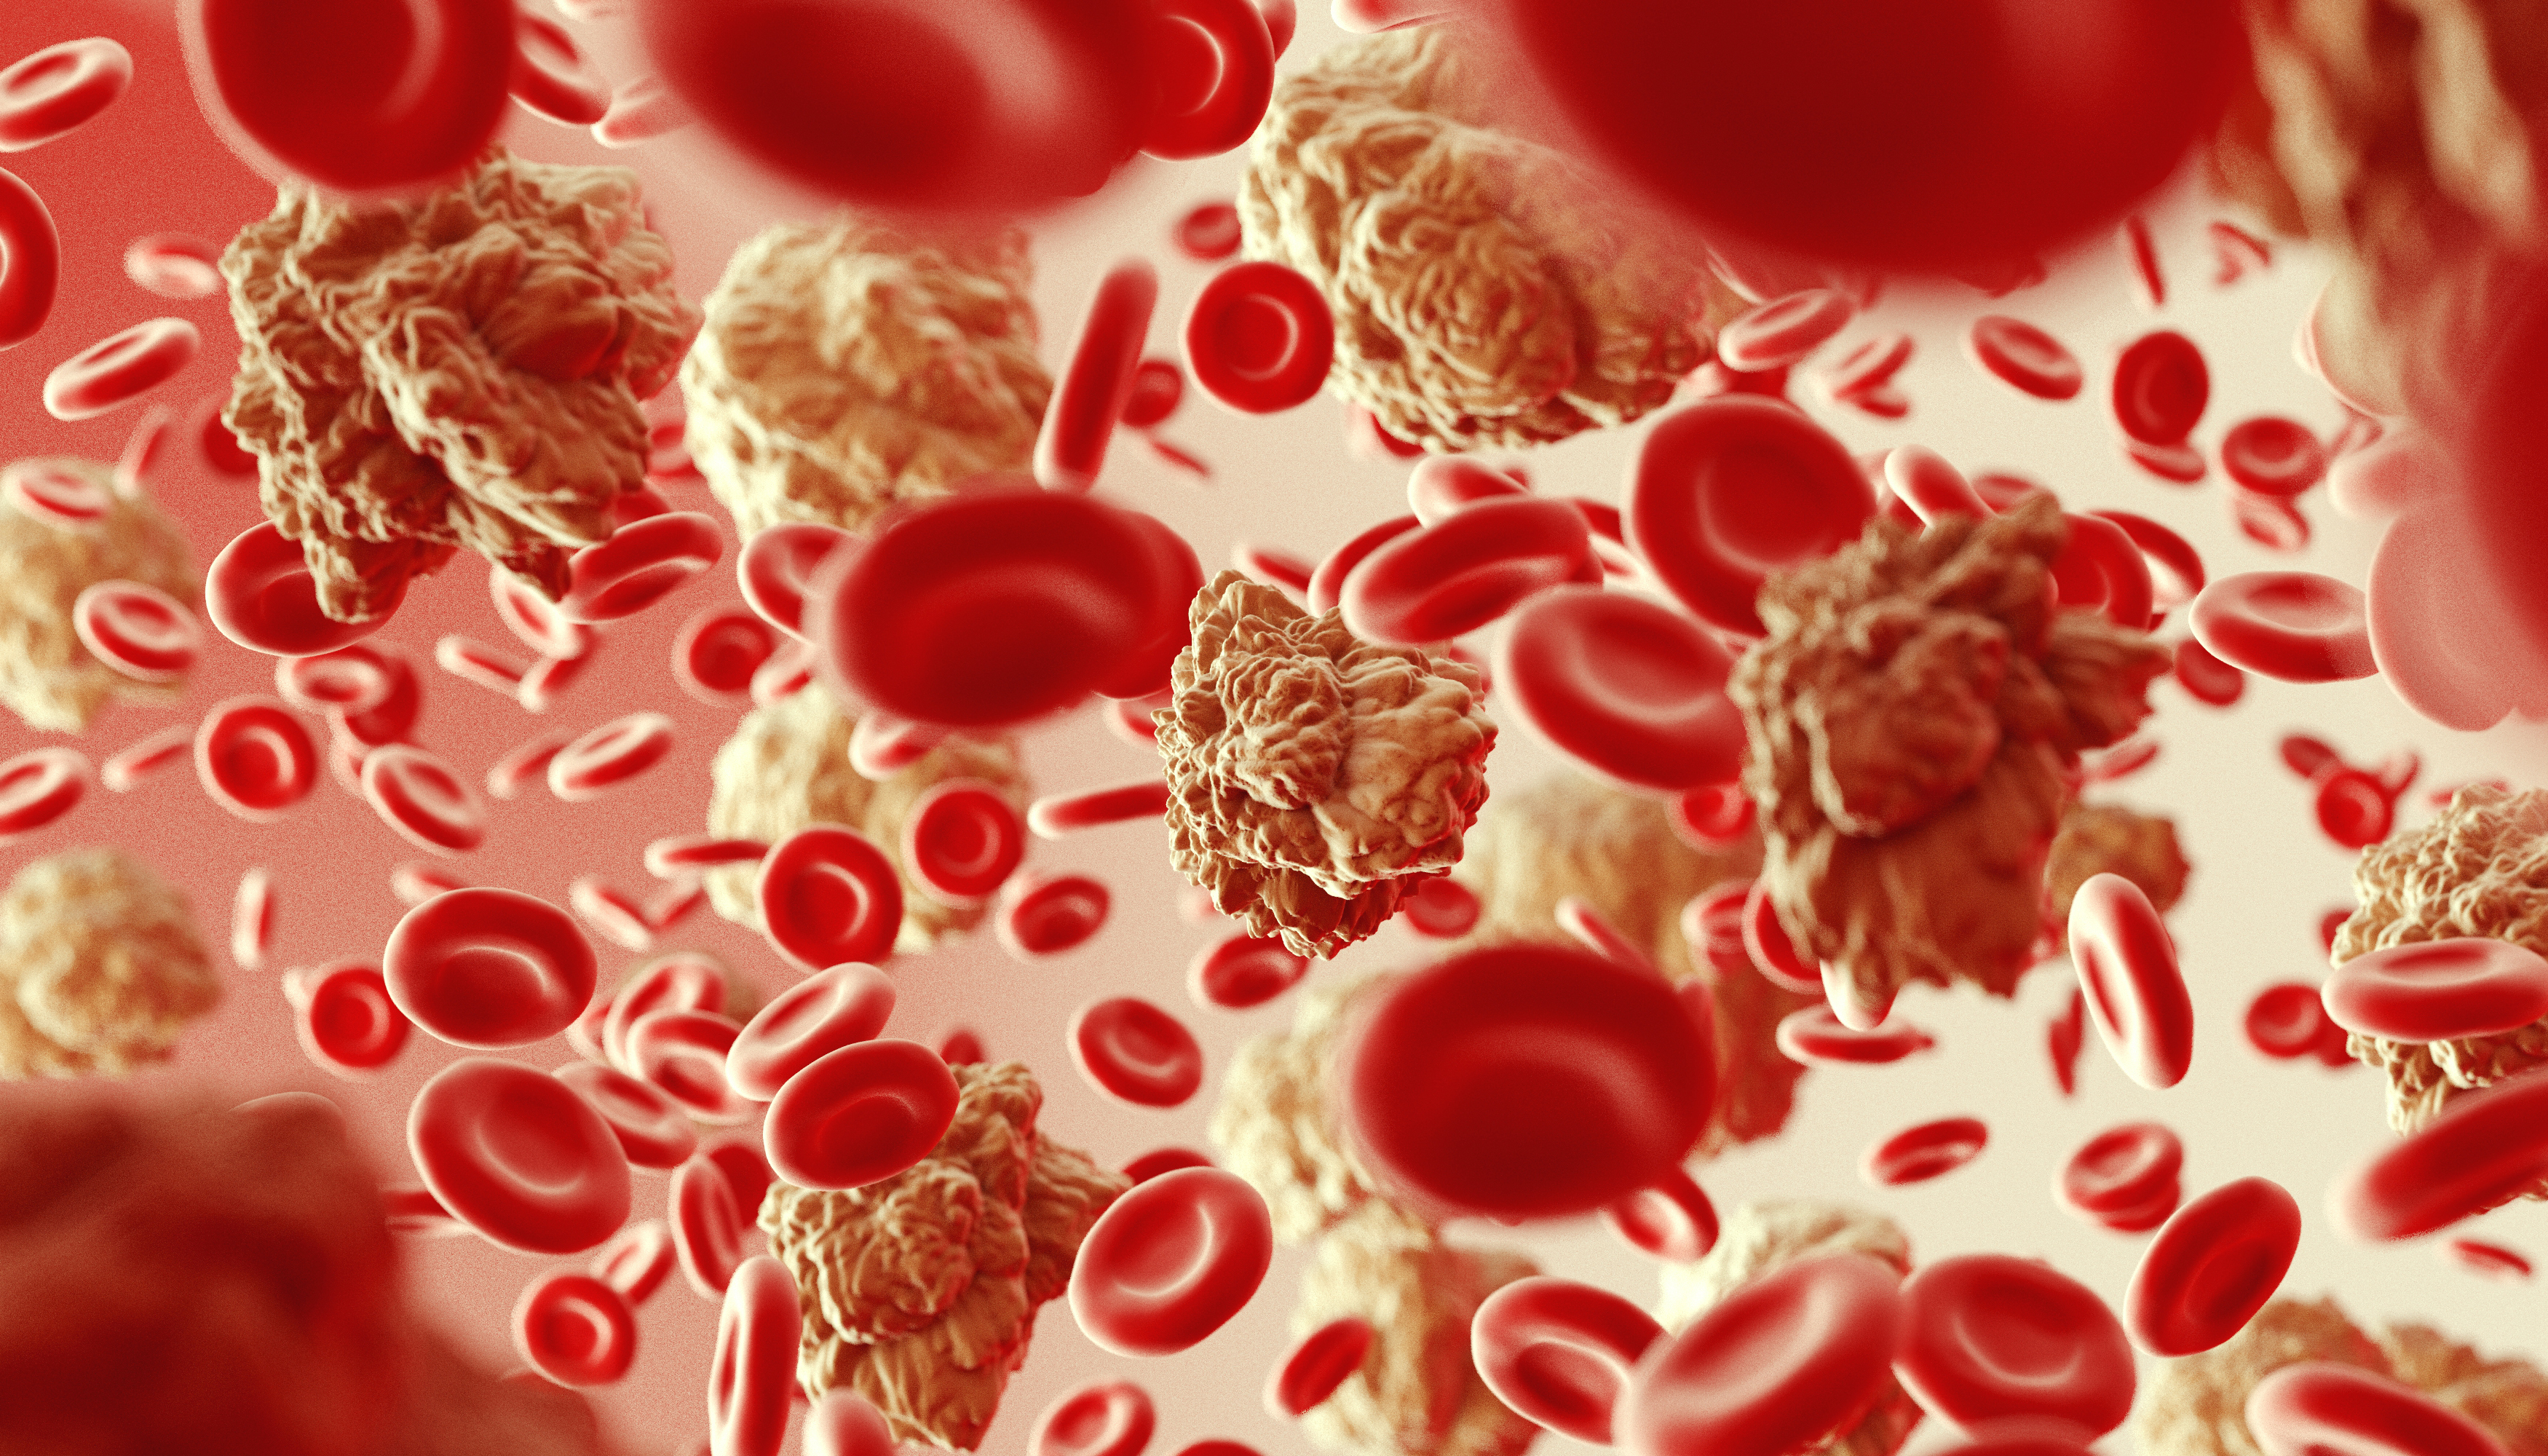 types of blood cancer